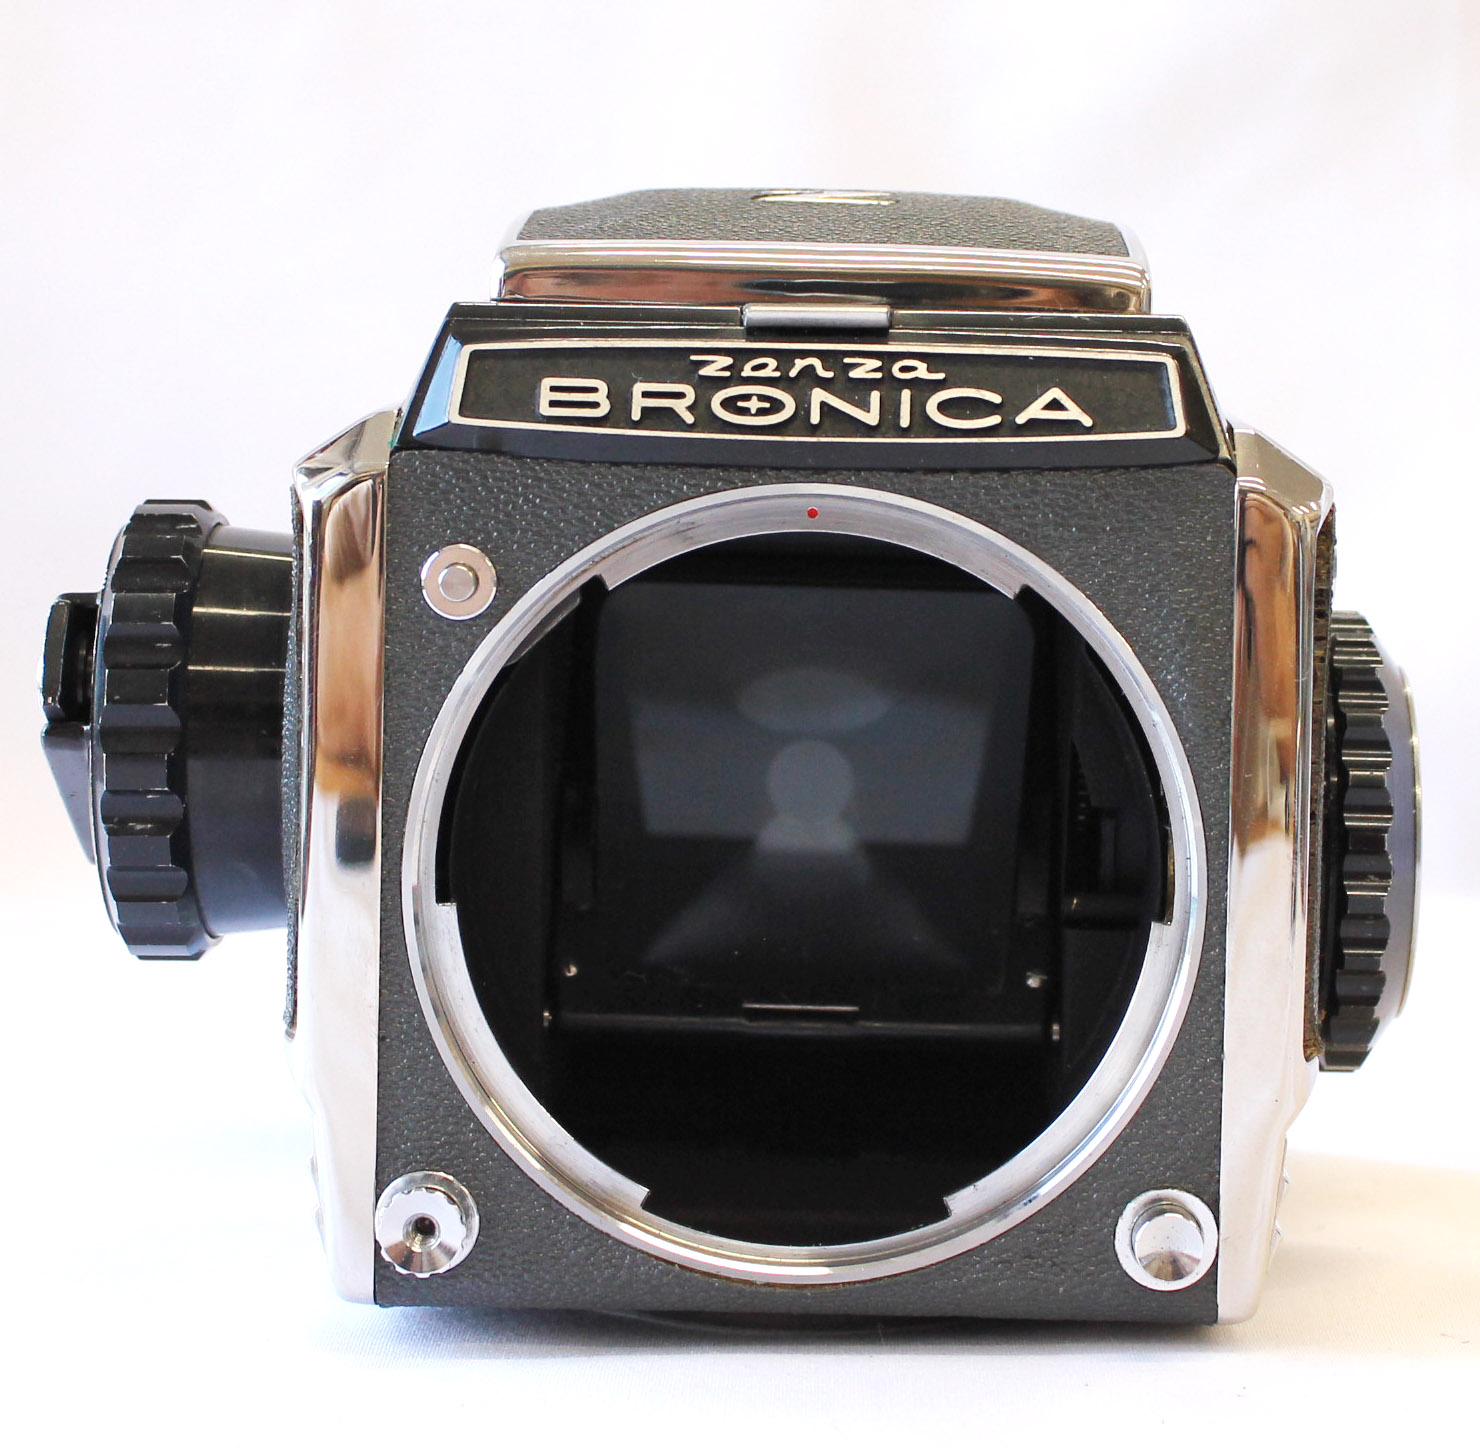 Zenza Bronica S2A Final Model (S/N CB156*) w/ Zenzanon MC 75mm F/2.8 and 6x6 Film Back from Japan Photo 7